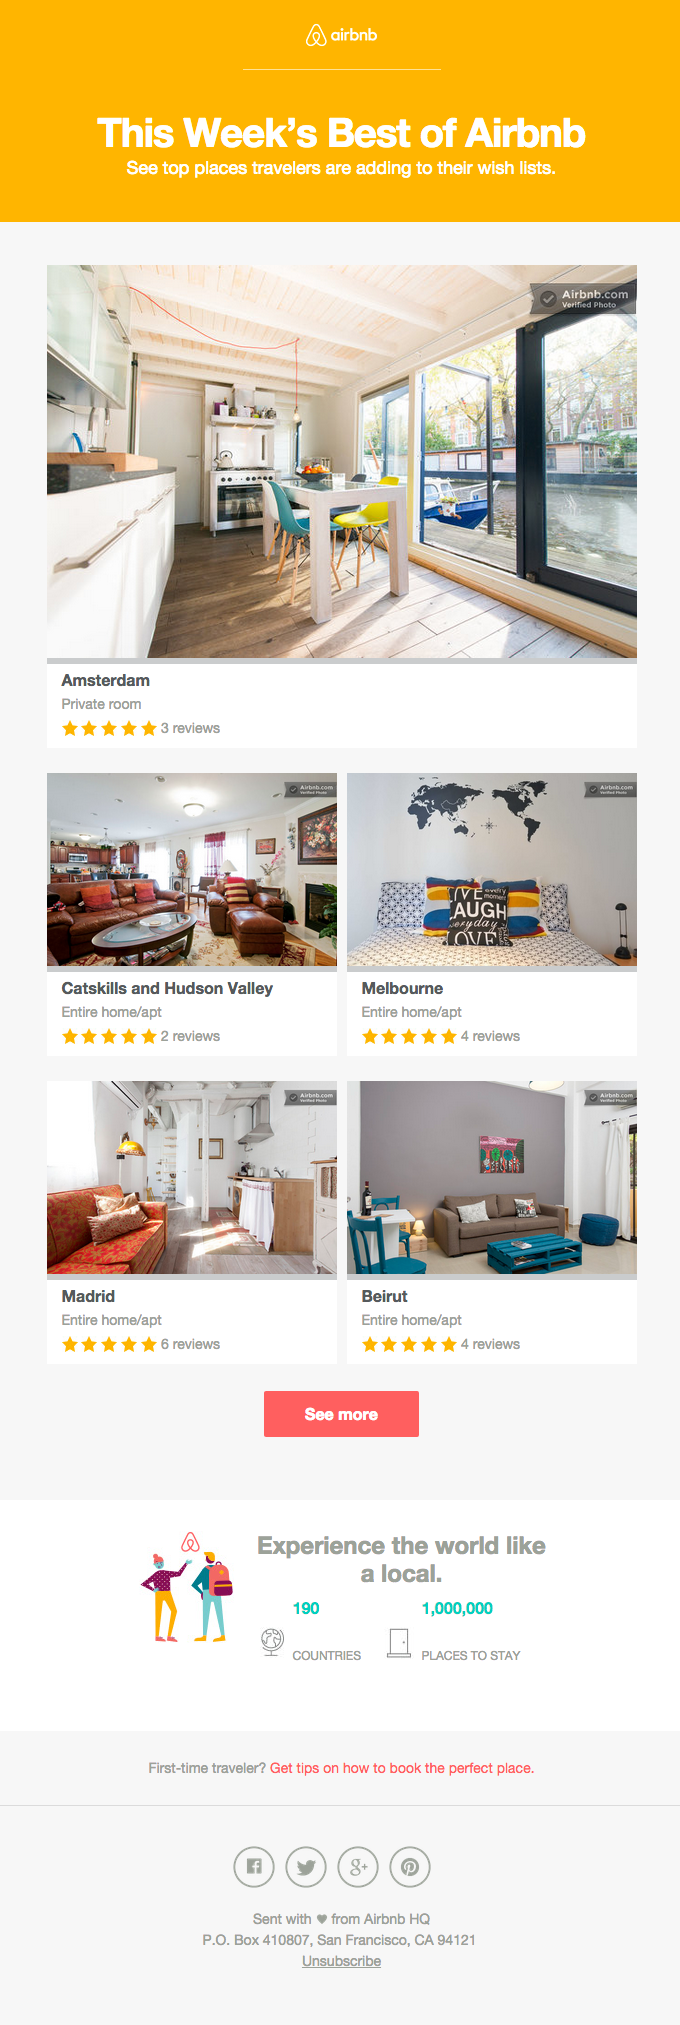 Exemple d'infolettre Airbnb